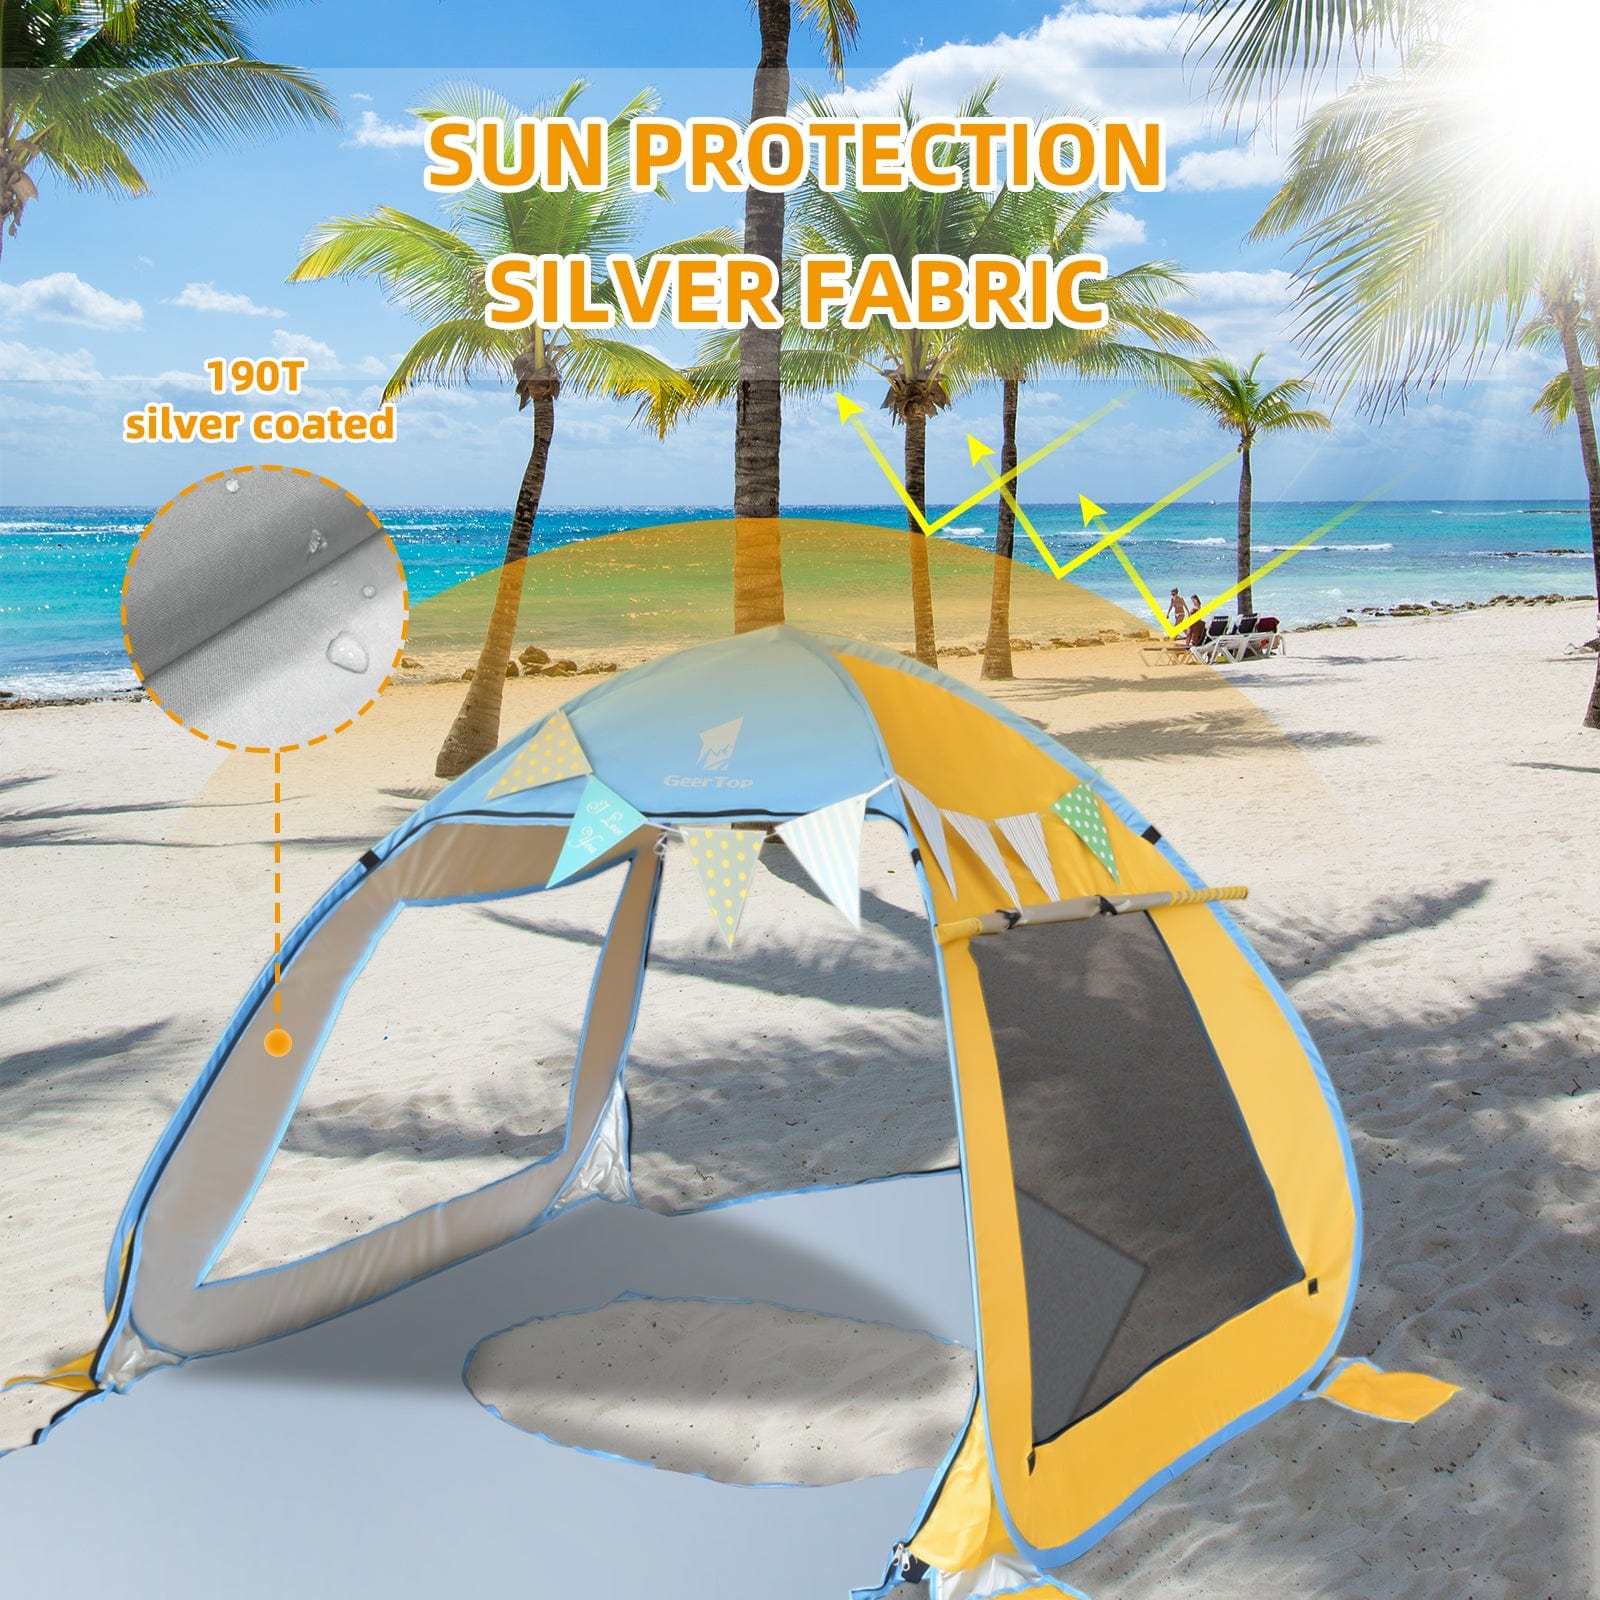 GeerTop Outdoor Store Tent Yellow Anti-UV Automatic Pop Up Beach Tent For Kids